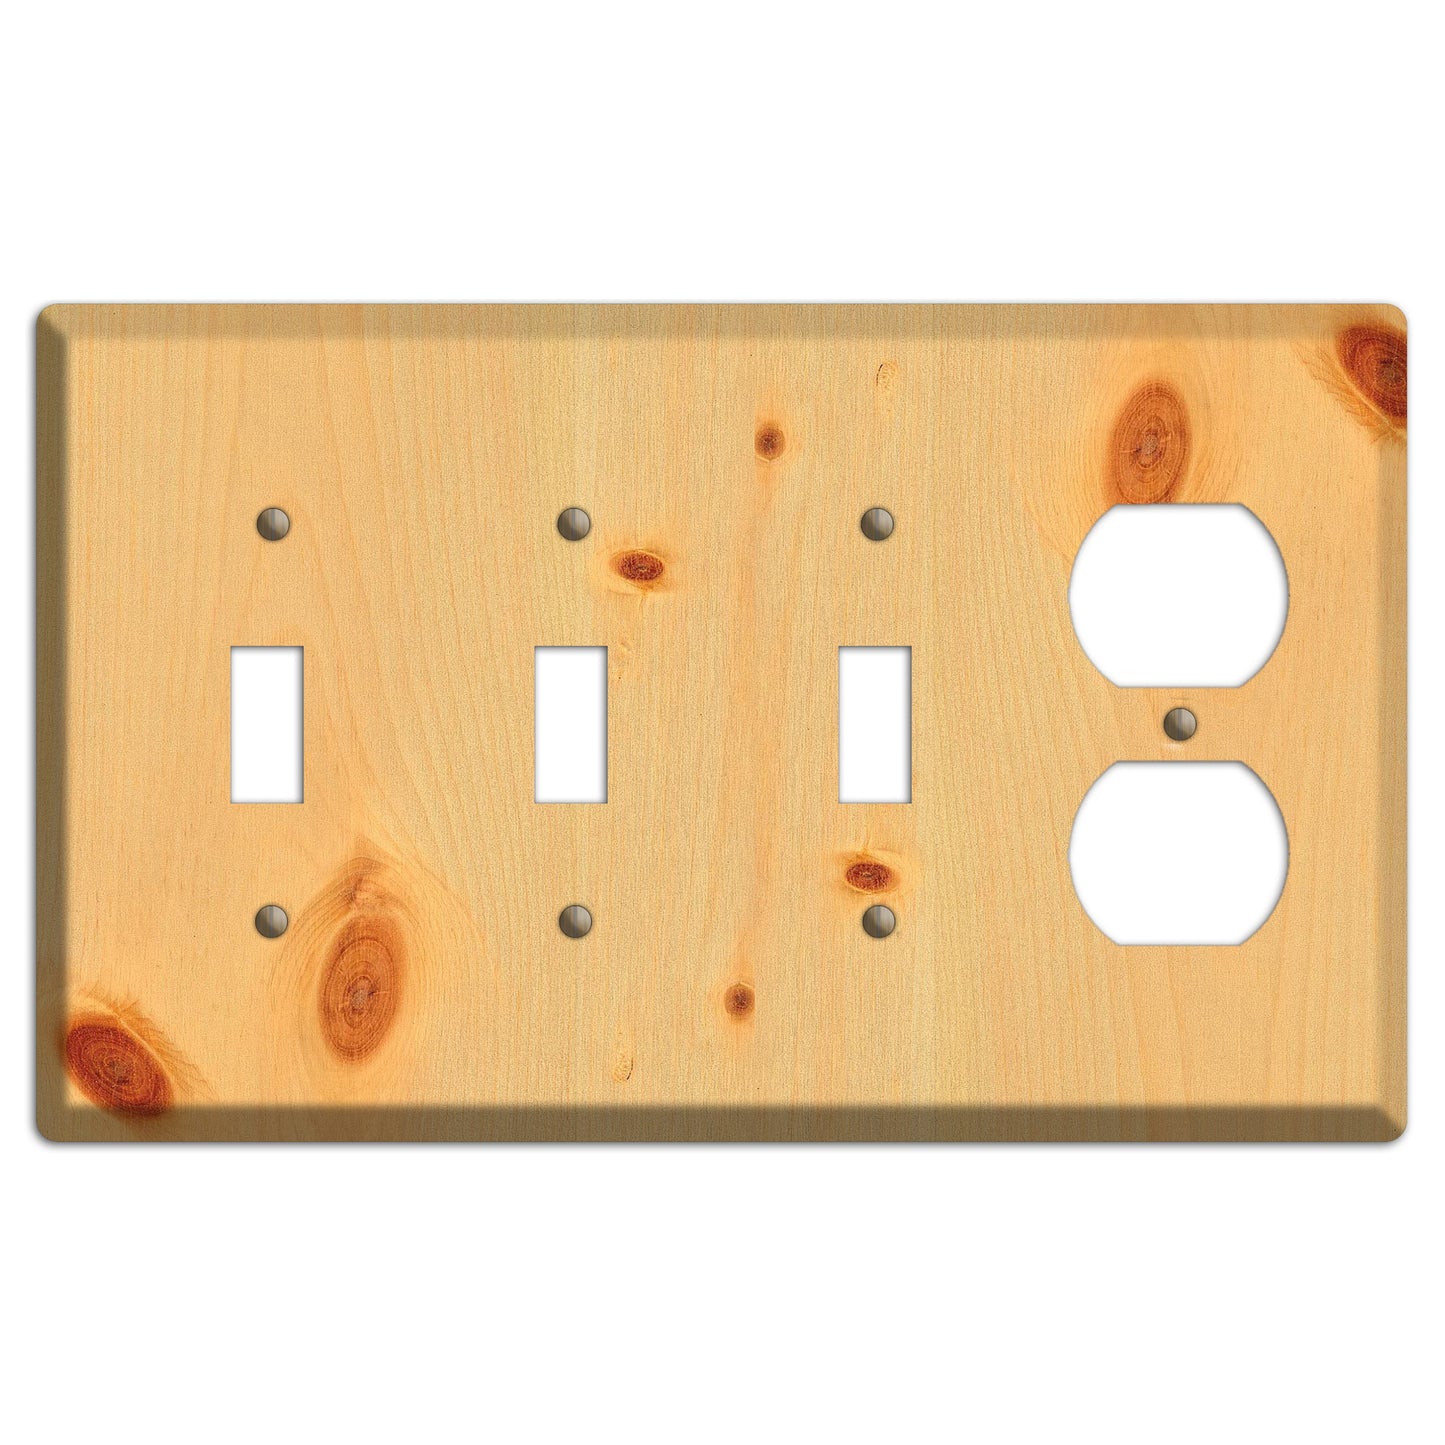 Unfinished Pine Wood 3 Toggle / Duplex Outlet Cover Plate